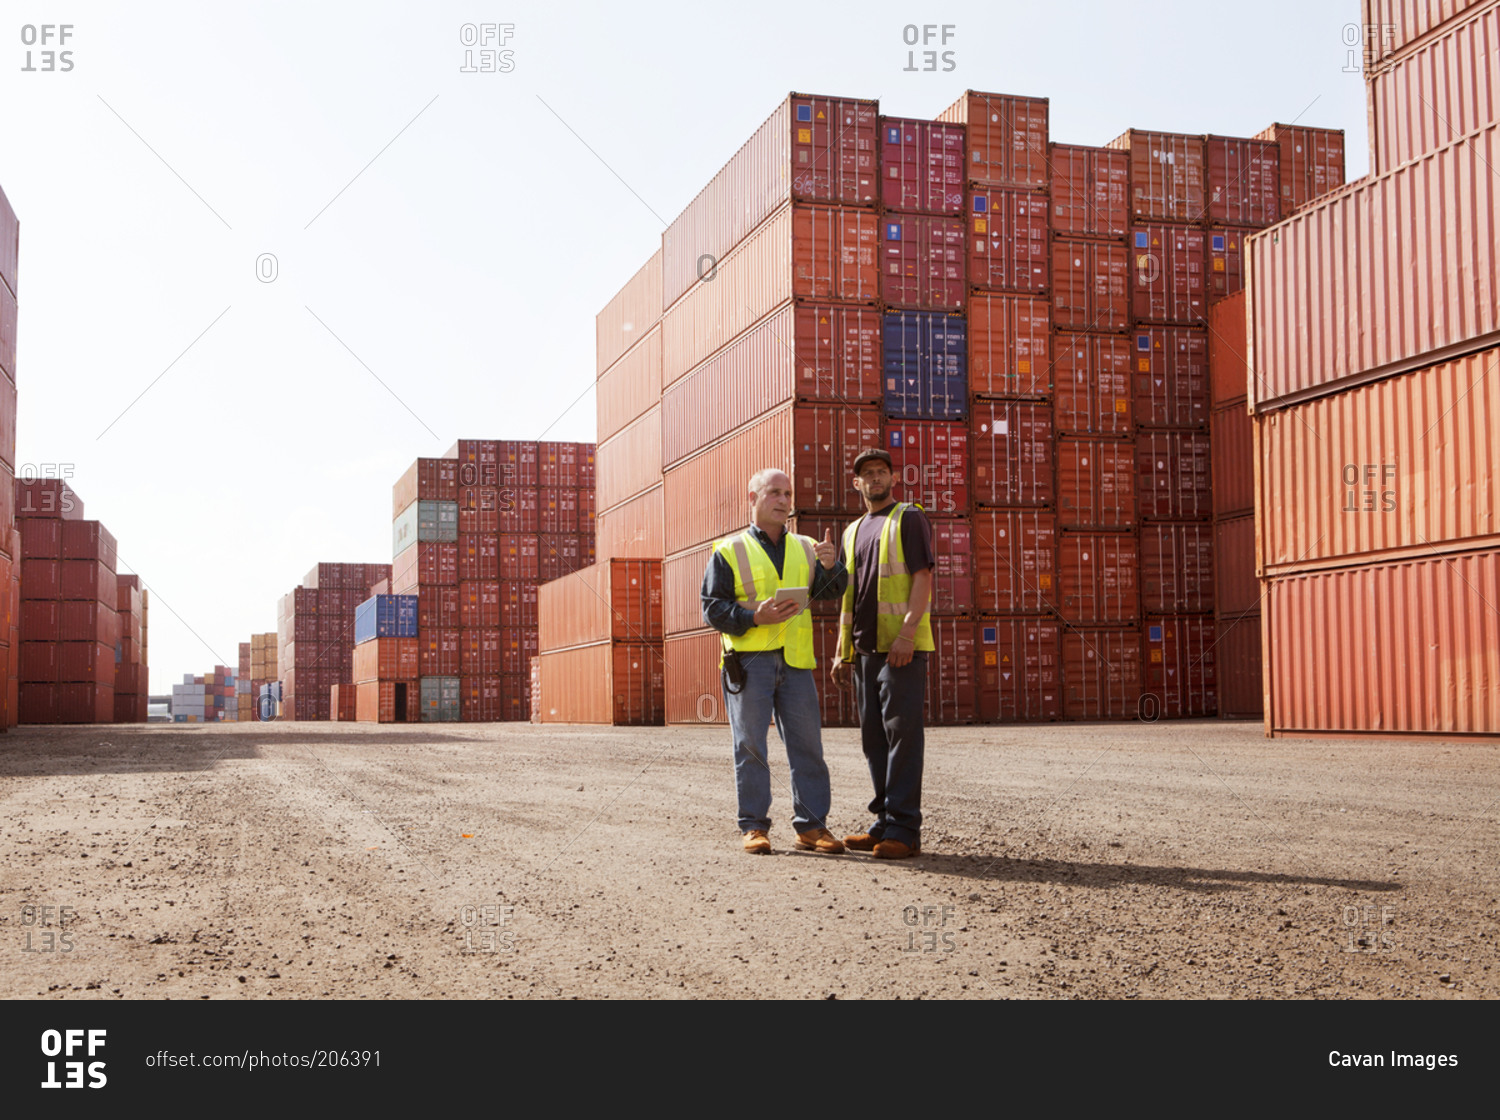 Freight yard employees inspecting cargo